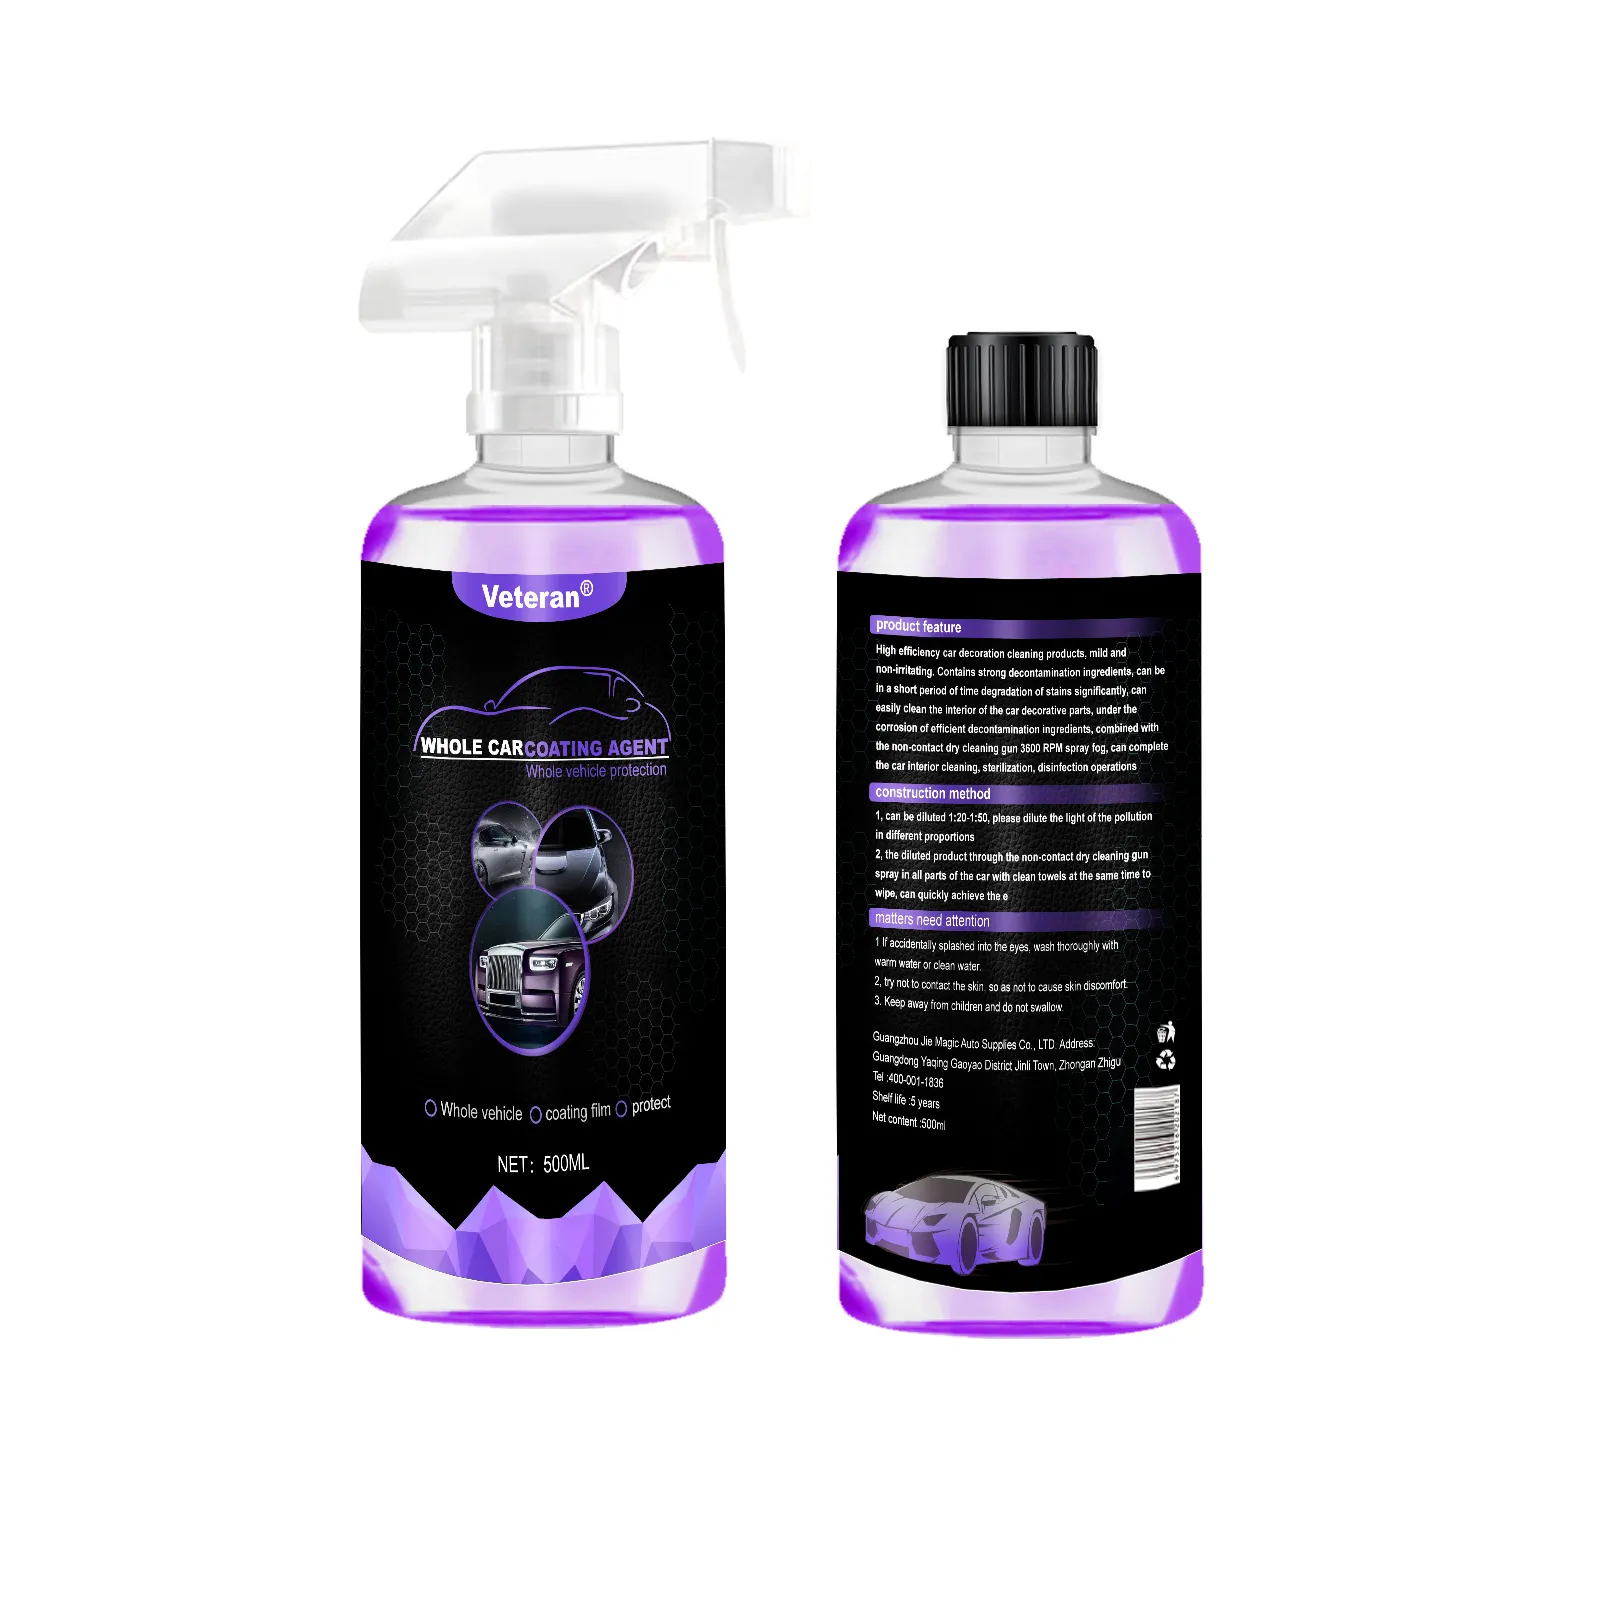 Car Coating Agent Waterproof Anti Fouling Fast Decontaminating Luster Restoring Truck Motorcycle Coating Spray For Cars